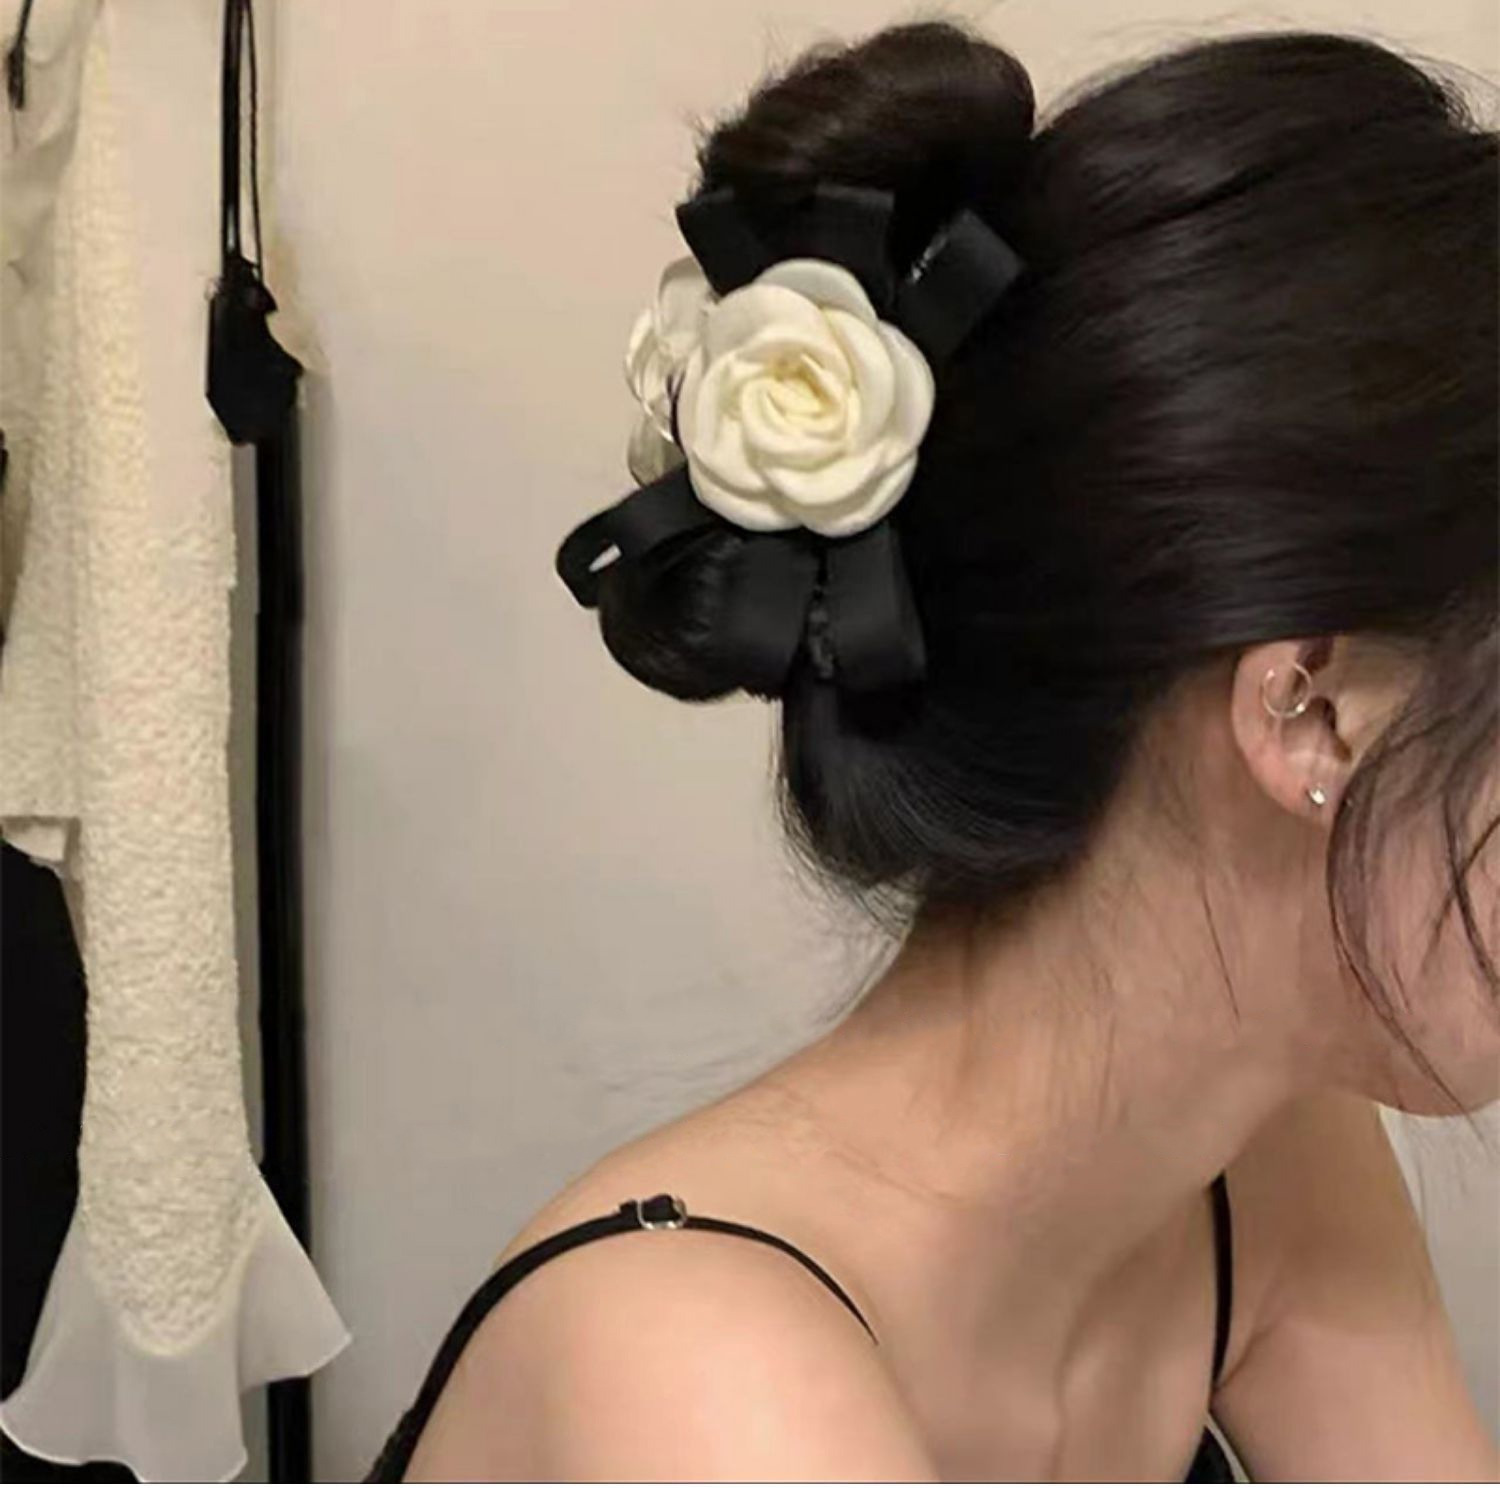 

Luxurious Camellia Flower Corsage Hair Clip For Women - Elegant And Classic Bow With Flower On French Barrette - Perfect For Fall Hair Accessories